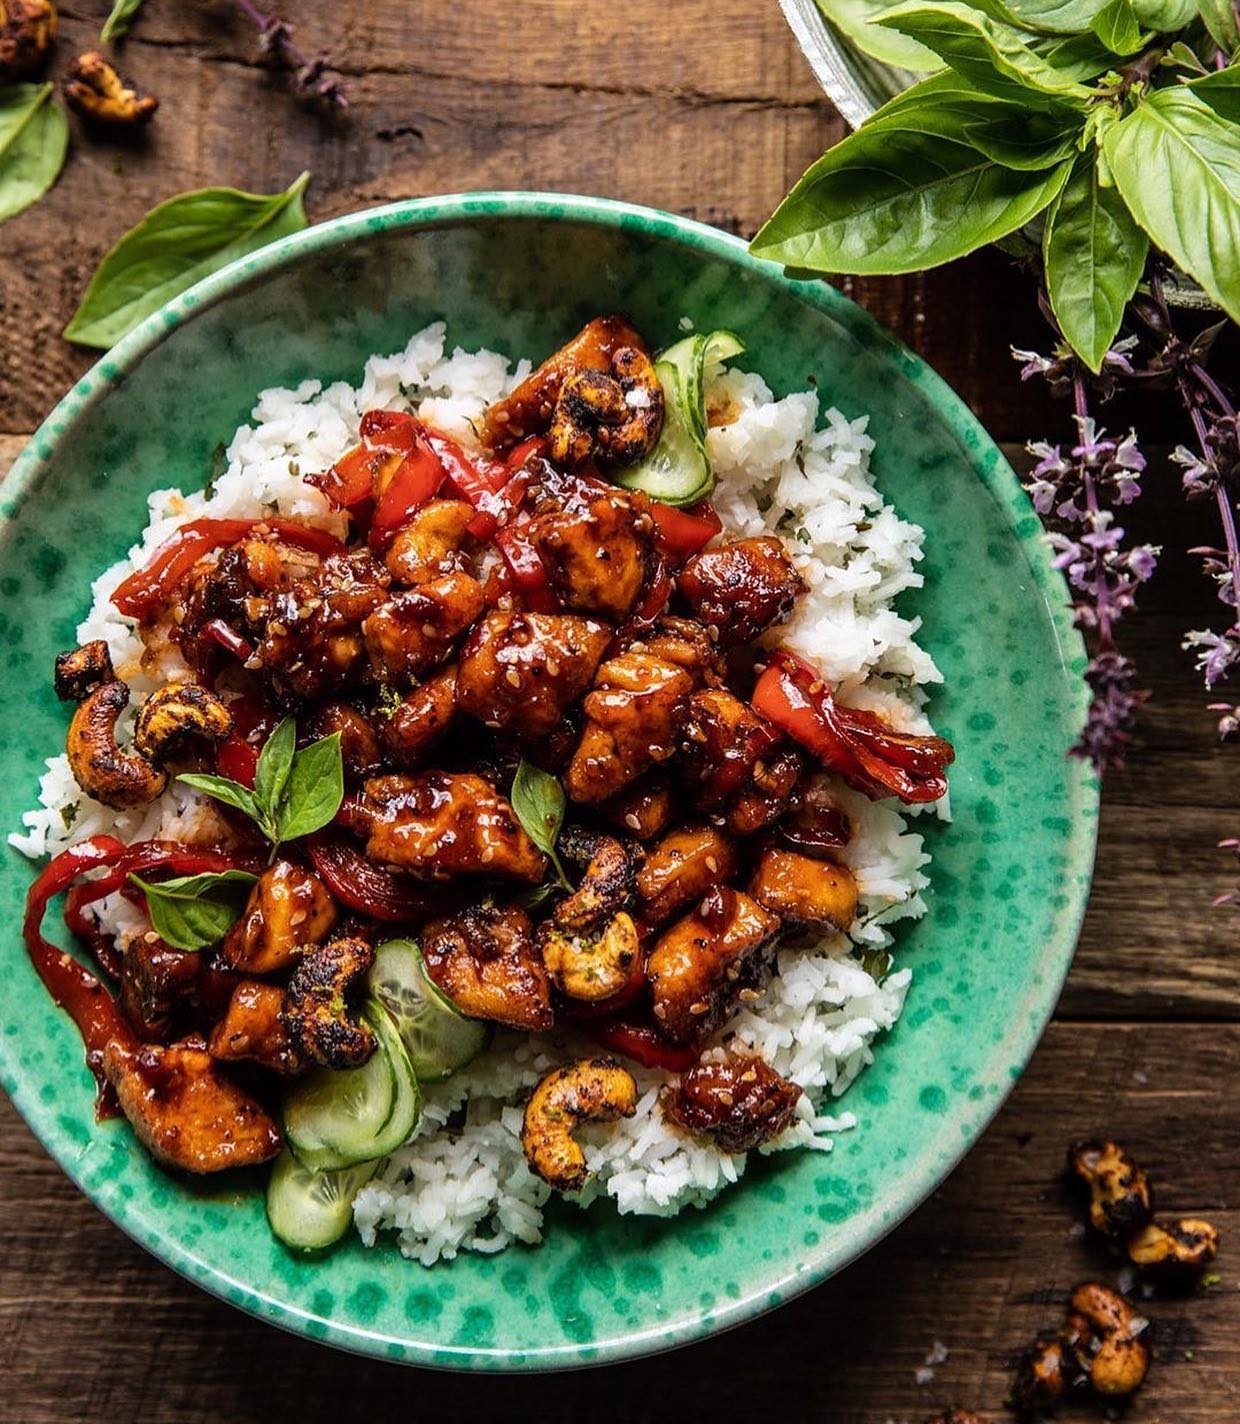 A great new meal idea.

Follow @pdrecipes • @halfbakedharvest Weeknight style Thai Basil Sesame Cashew Chicken with Coconut Rice...and addicting salted chili honey lime cashews (not joking, you can't stop eating these). I love this dish. It’s easy, almost no-cook, and just so good. It's all about that sweet and spicy Thai chili sauce, crispy chicken + fresh basil, and yeah, those cashews. Just add coconut rice…all the (very good) things.

#food52 #feedfeed  #soup  #cozyfood  #wholefoods #allrecipes #tasteofhome #tohfoodie #epicurious #wildrice  #tastingtable #realsimple #todayfood #eatingwell #cookinglight  #eats #bhg #bonappetit #makesmewhole #thenewhealthy #cleaneating #dianemorrisey  #f52community #comfortfood #soup #chickensoup #minestrone